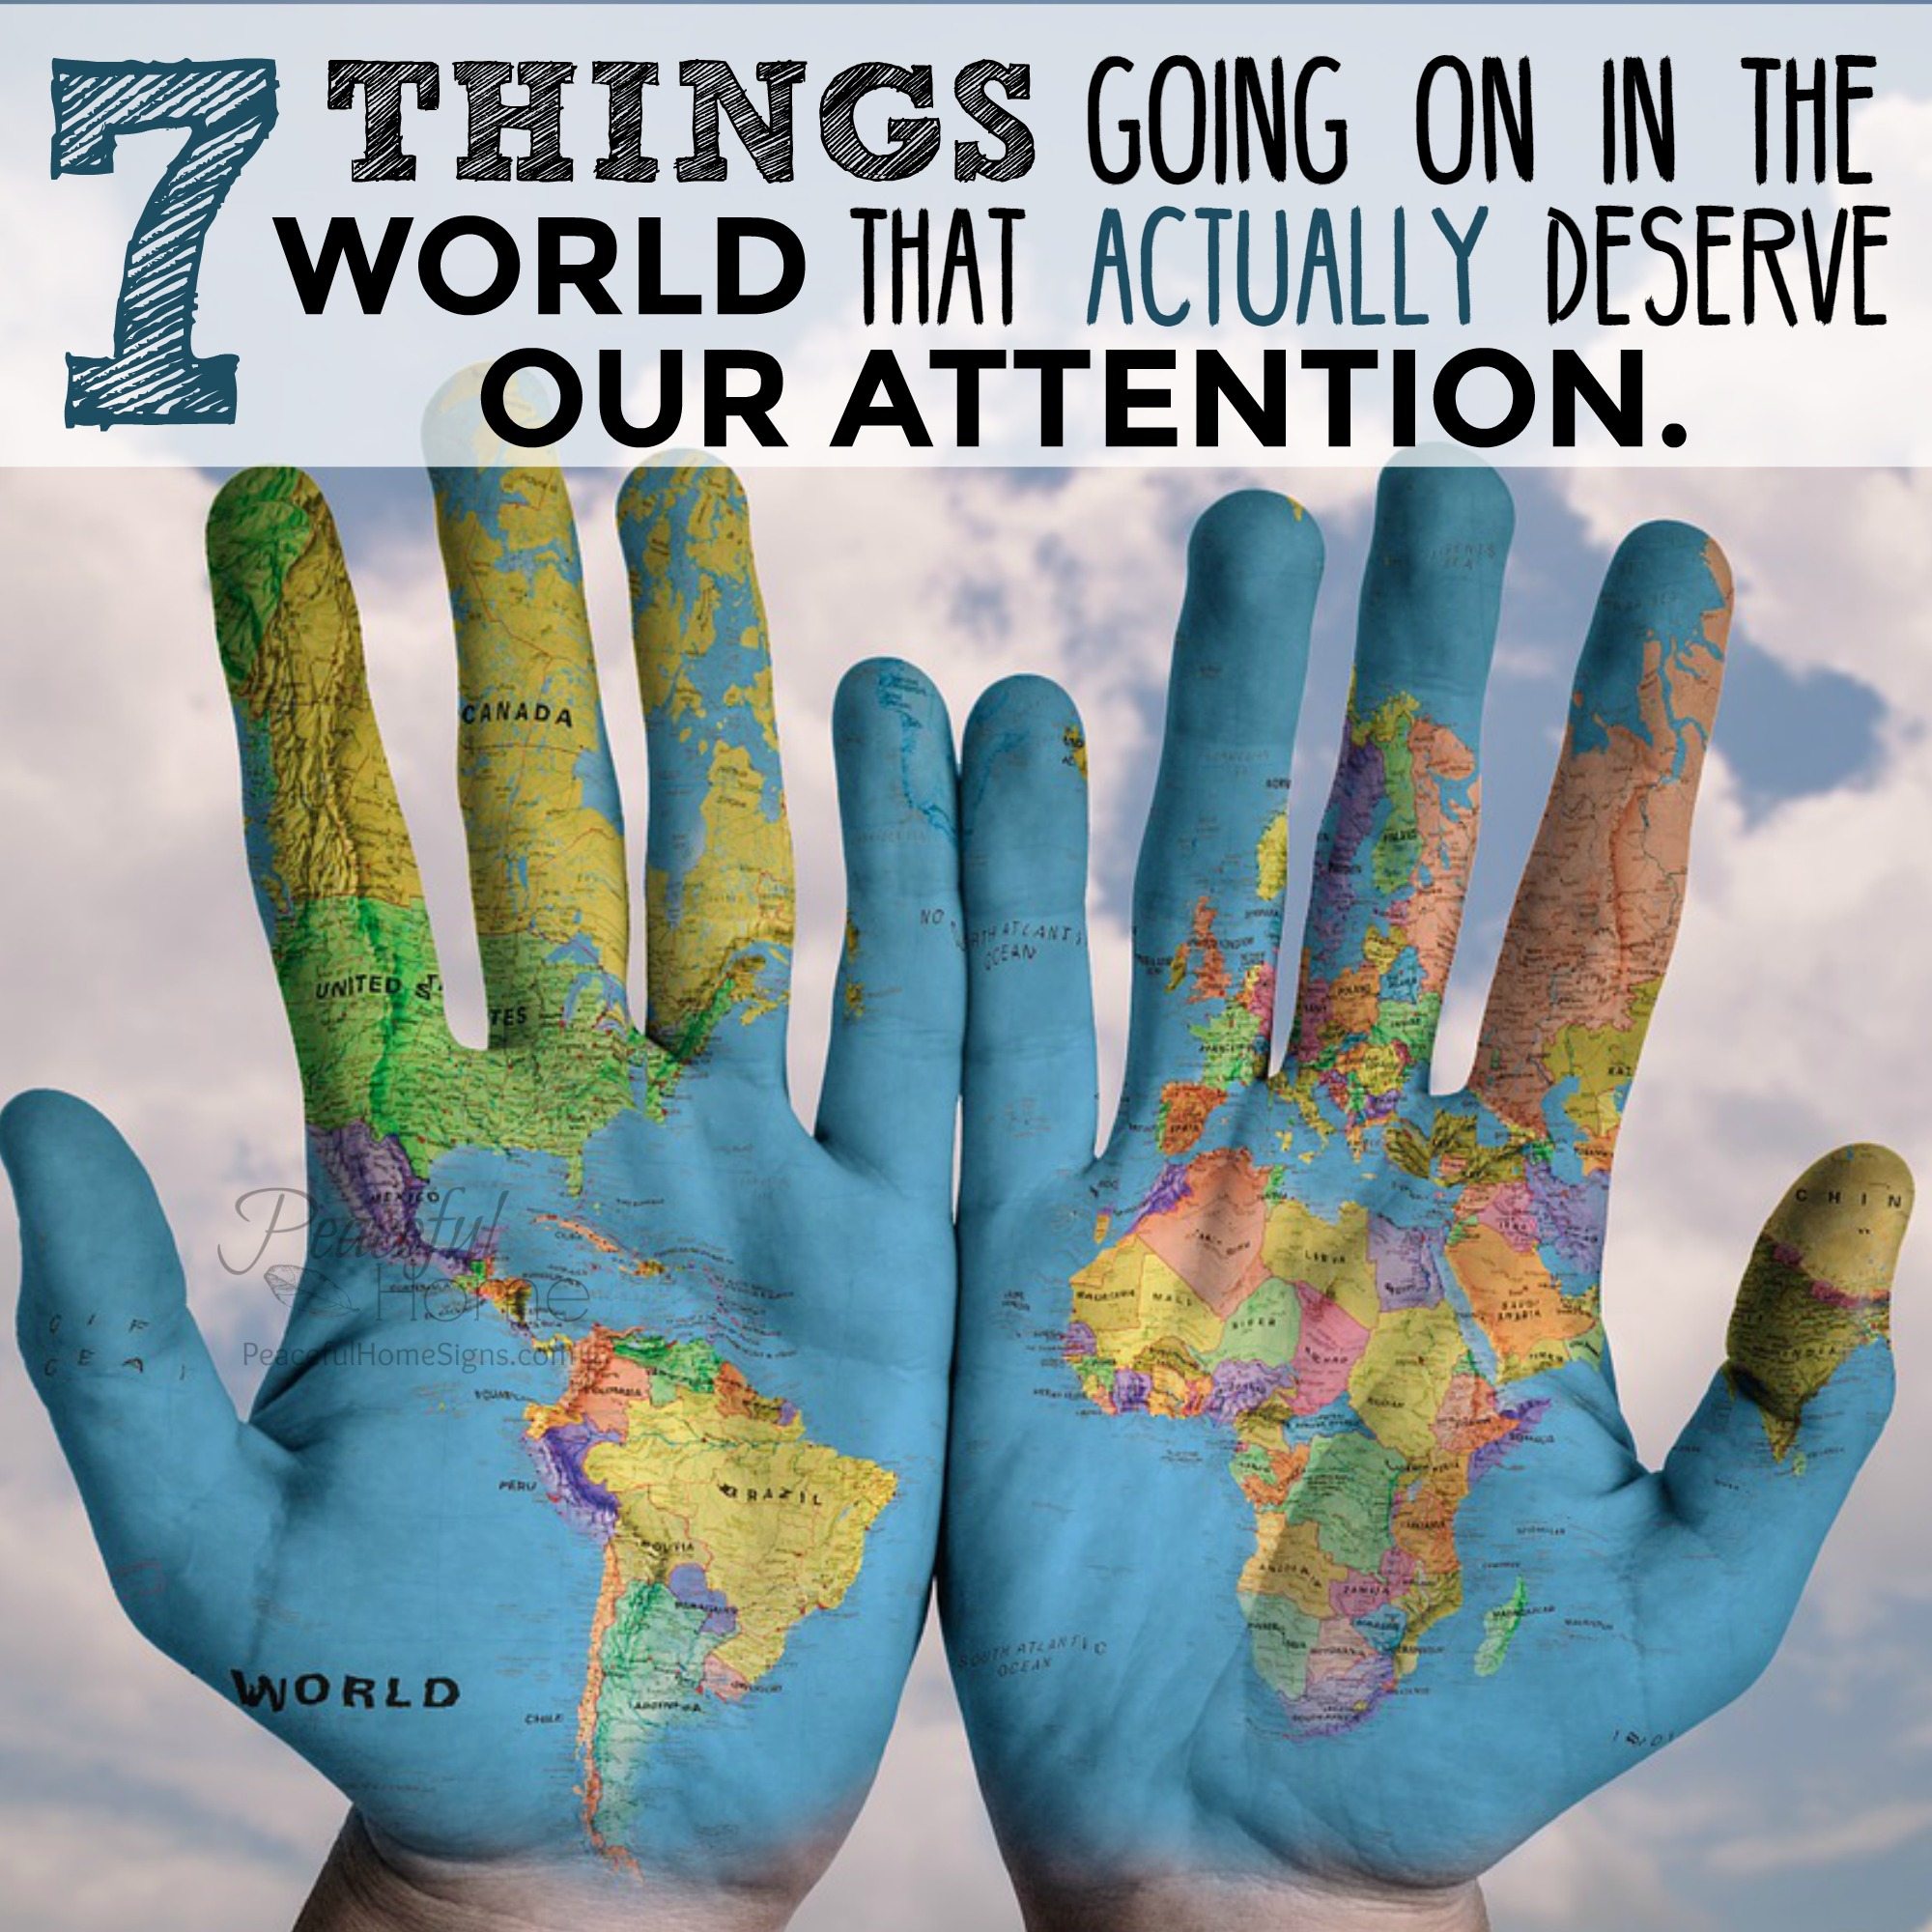 7 things going on in the world that actually deserve our attention